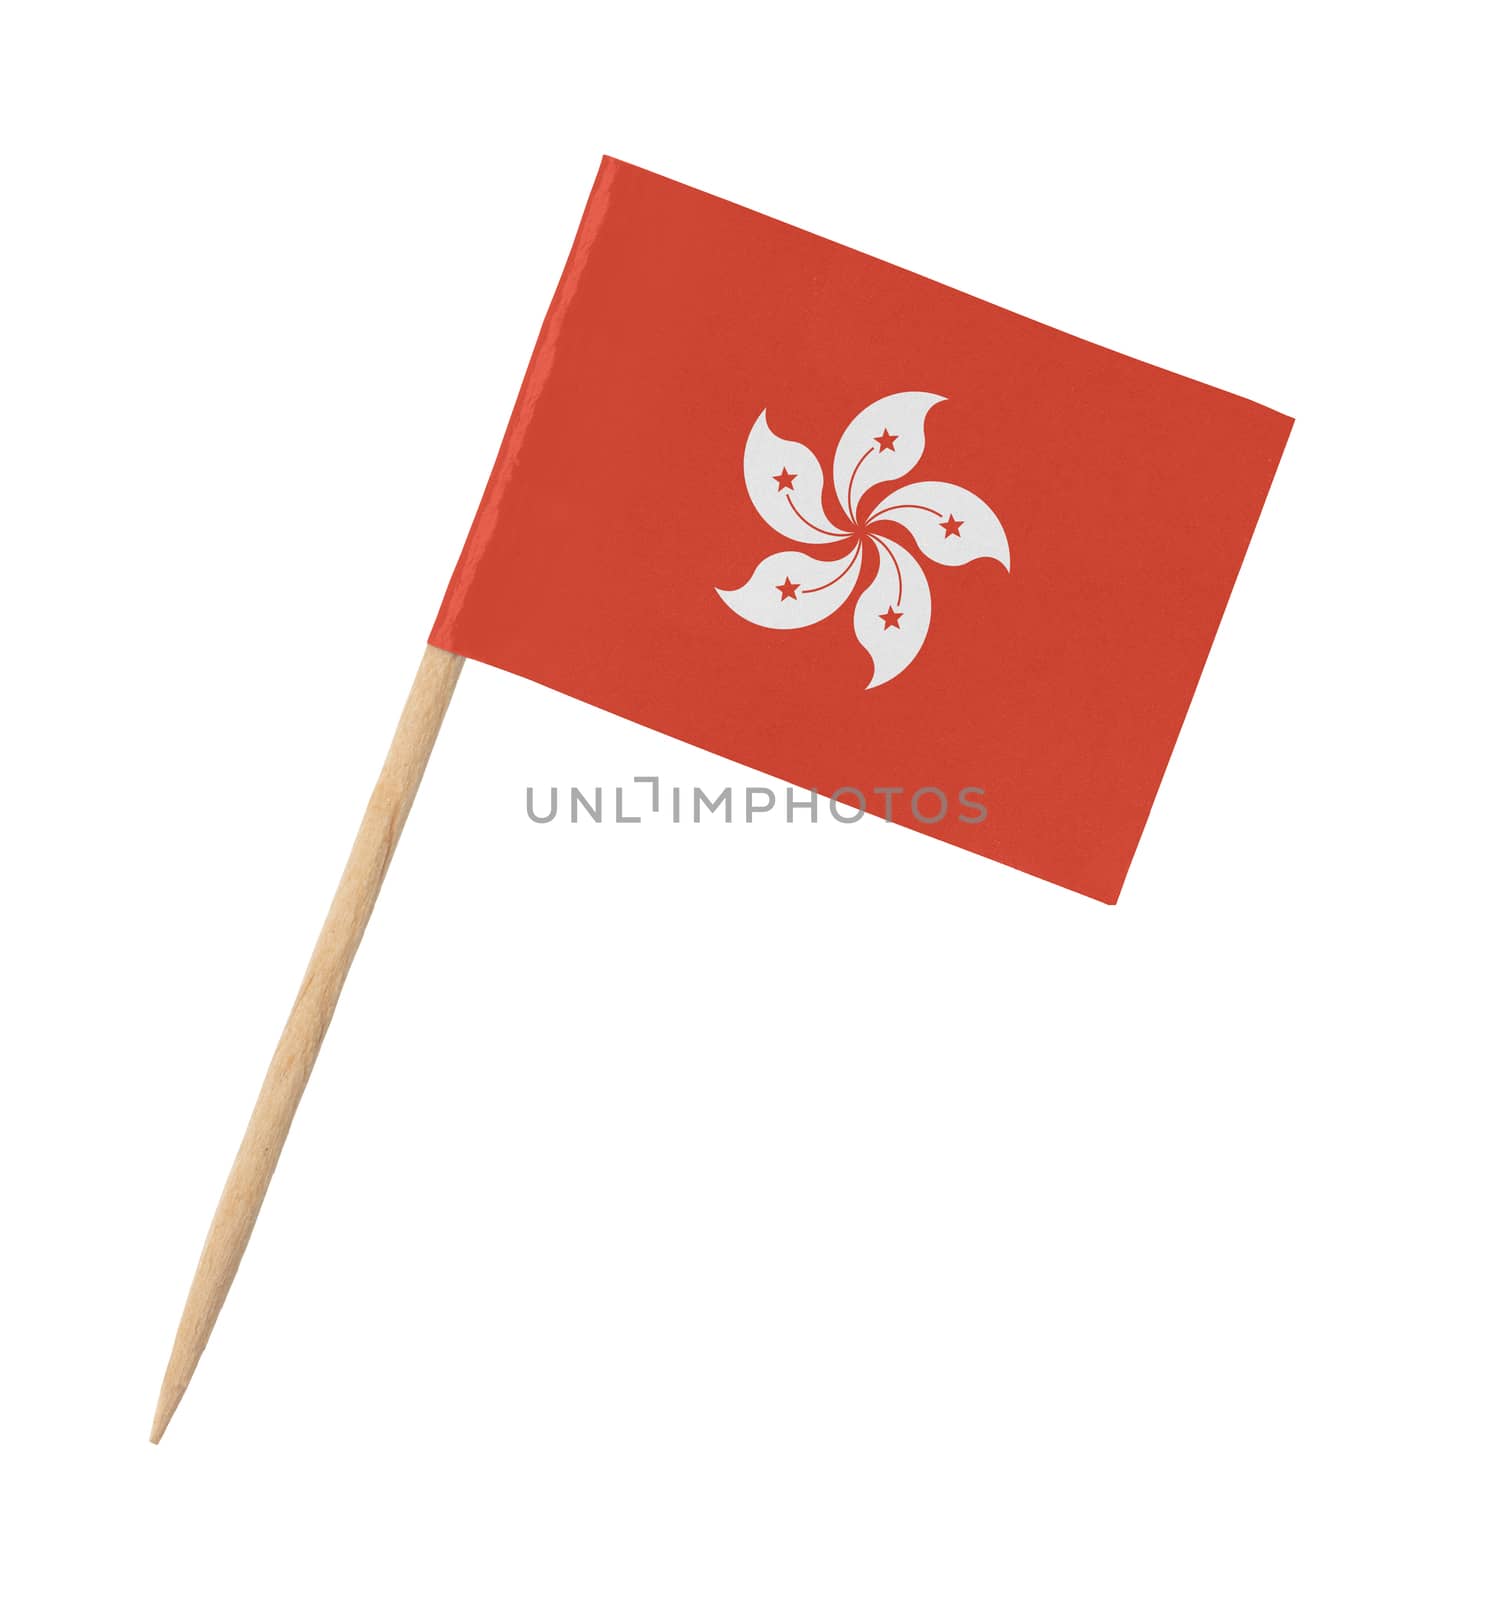 Small paper flag of Hong Kong on wooden stick, isolated on white